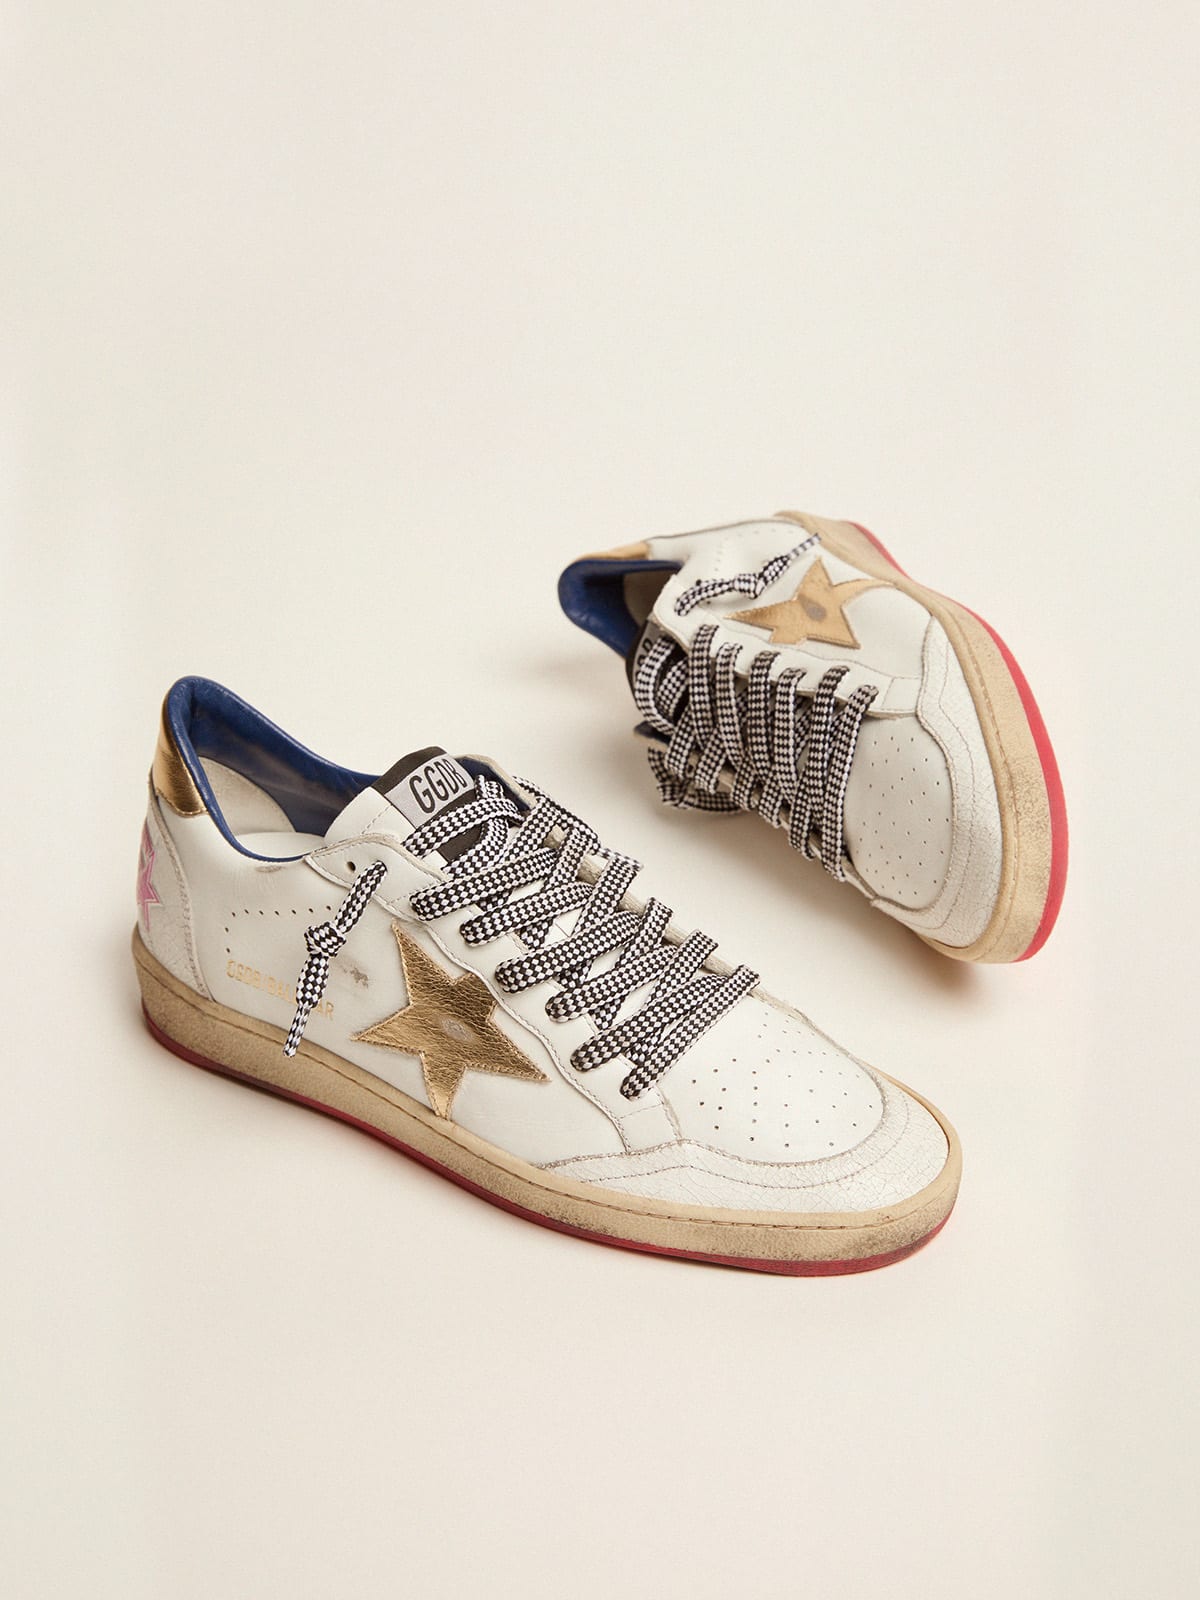 Ball Star LTD sneakers in white leather with gold inserts | Golden Goose